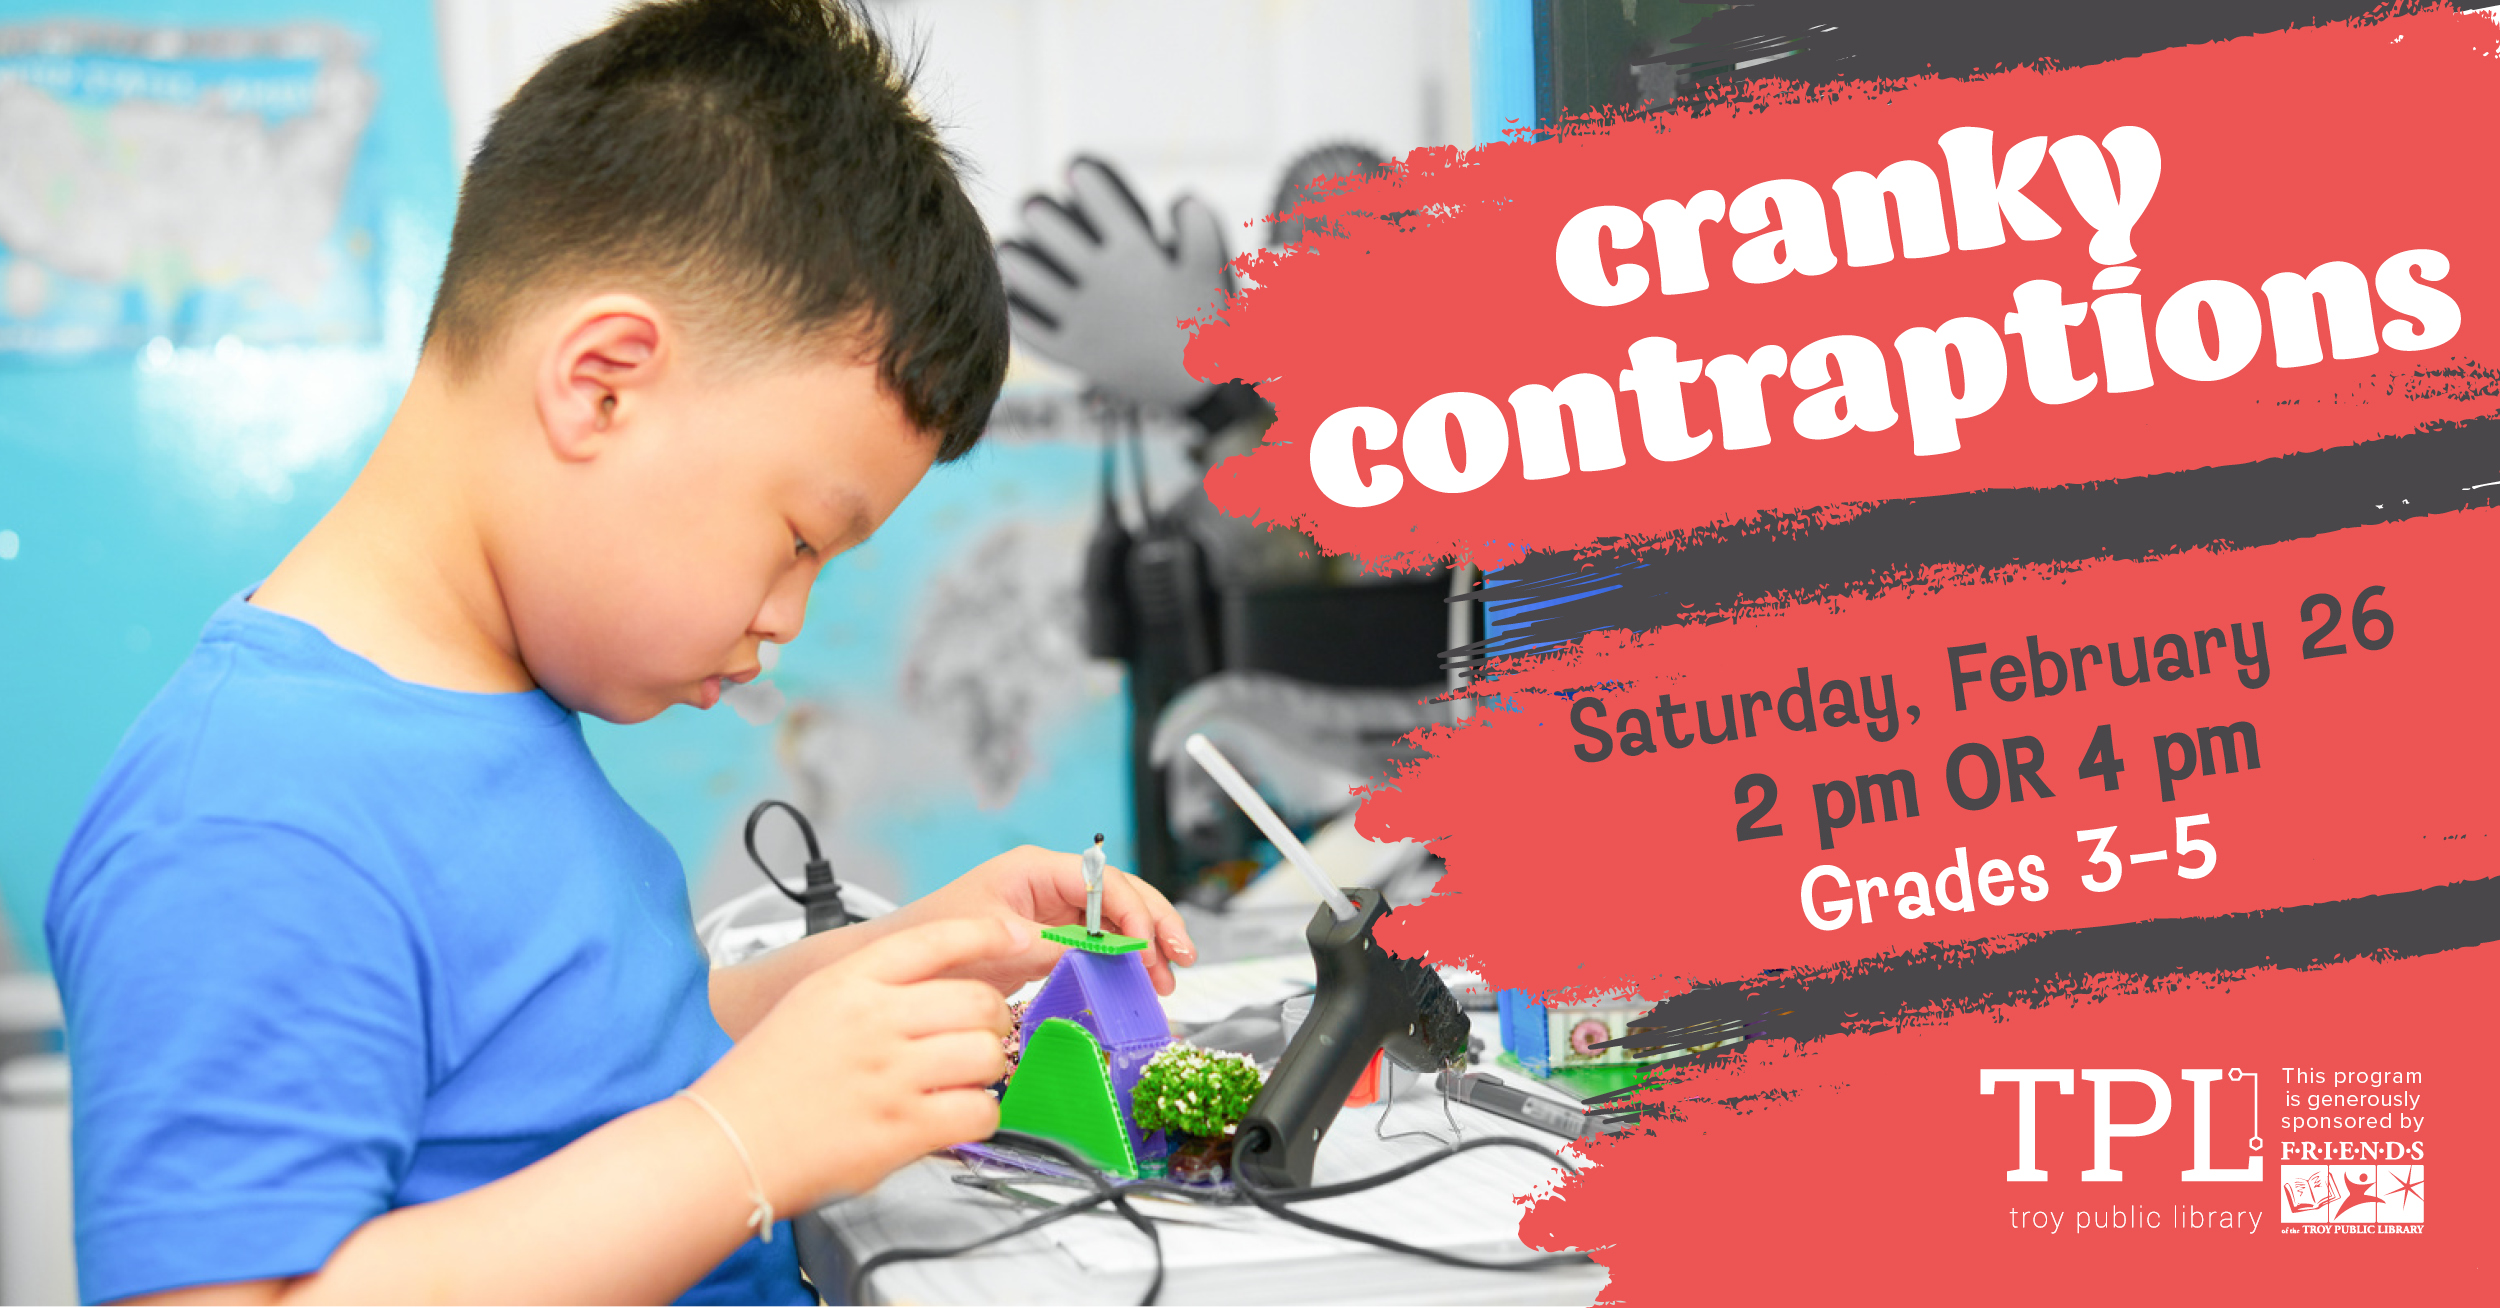 Cranky Contraptions Saturday, February 26 2pm or 4pm. Grades 3-5. Sponsored by the Friends of the Troy Public Library